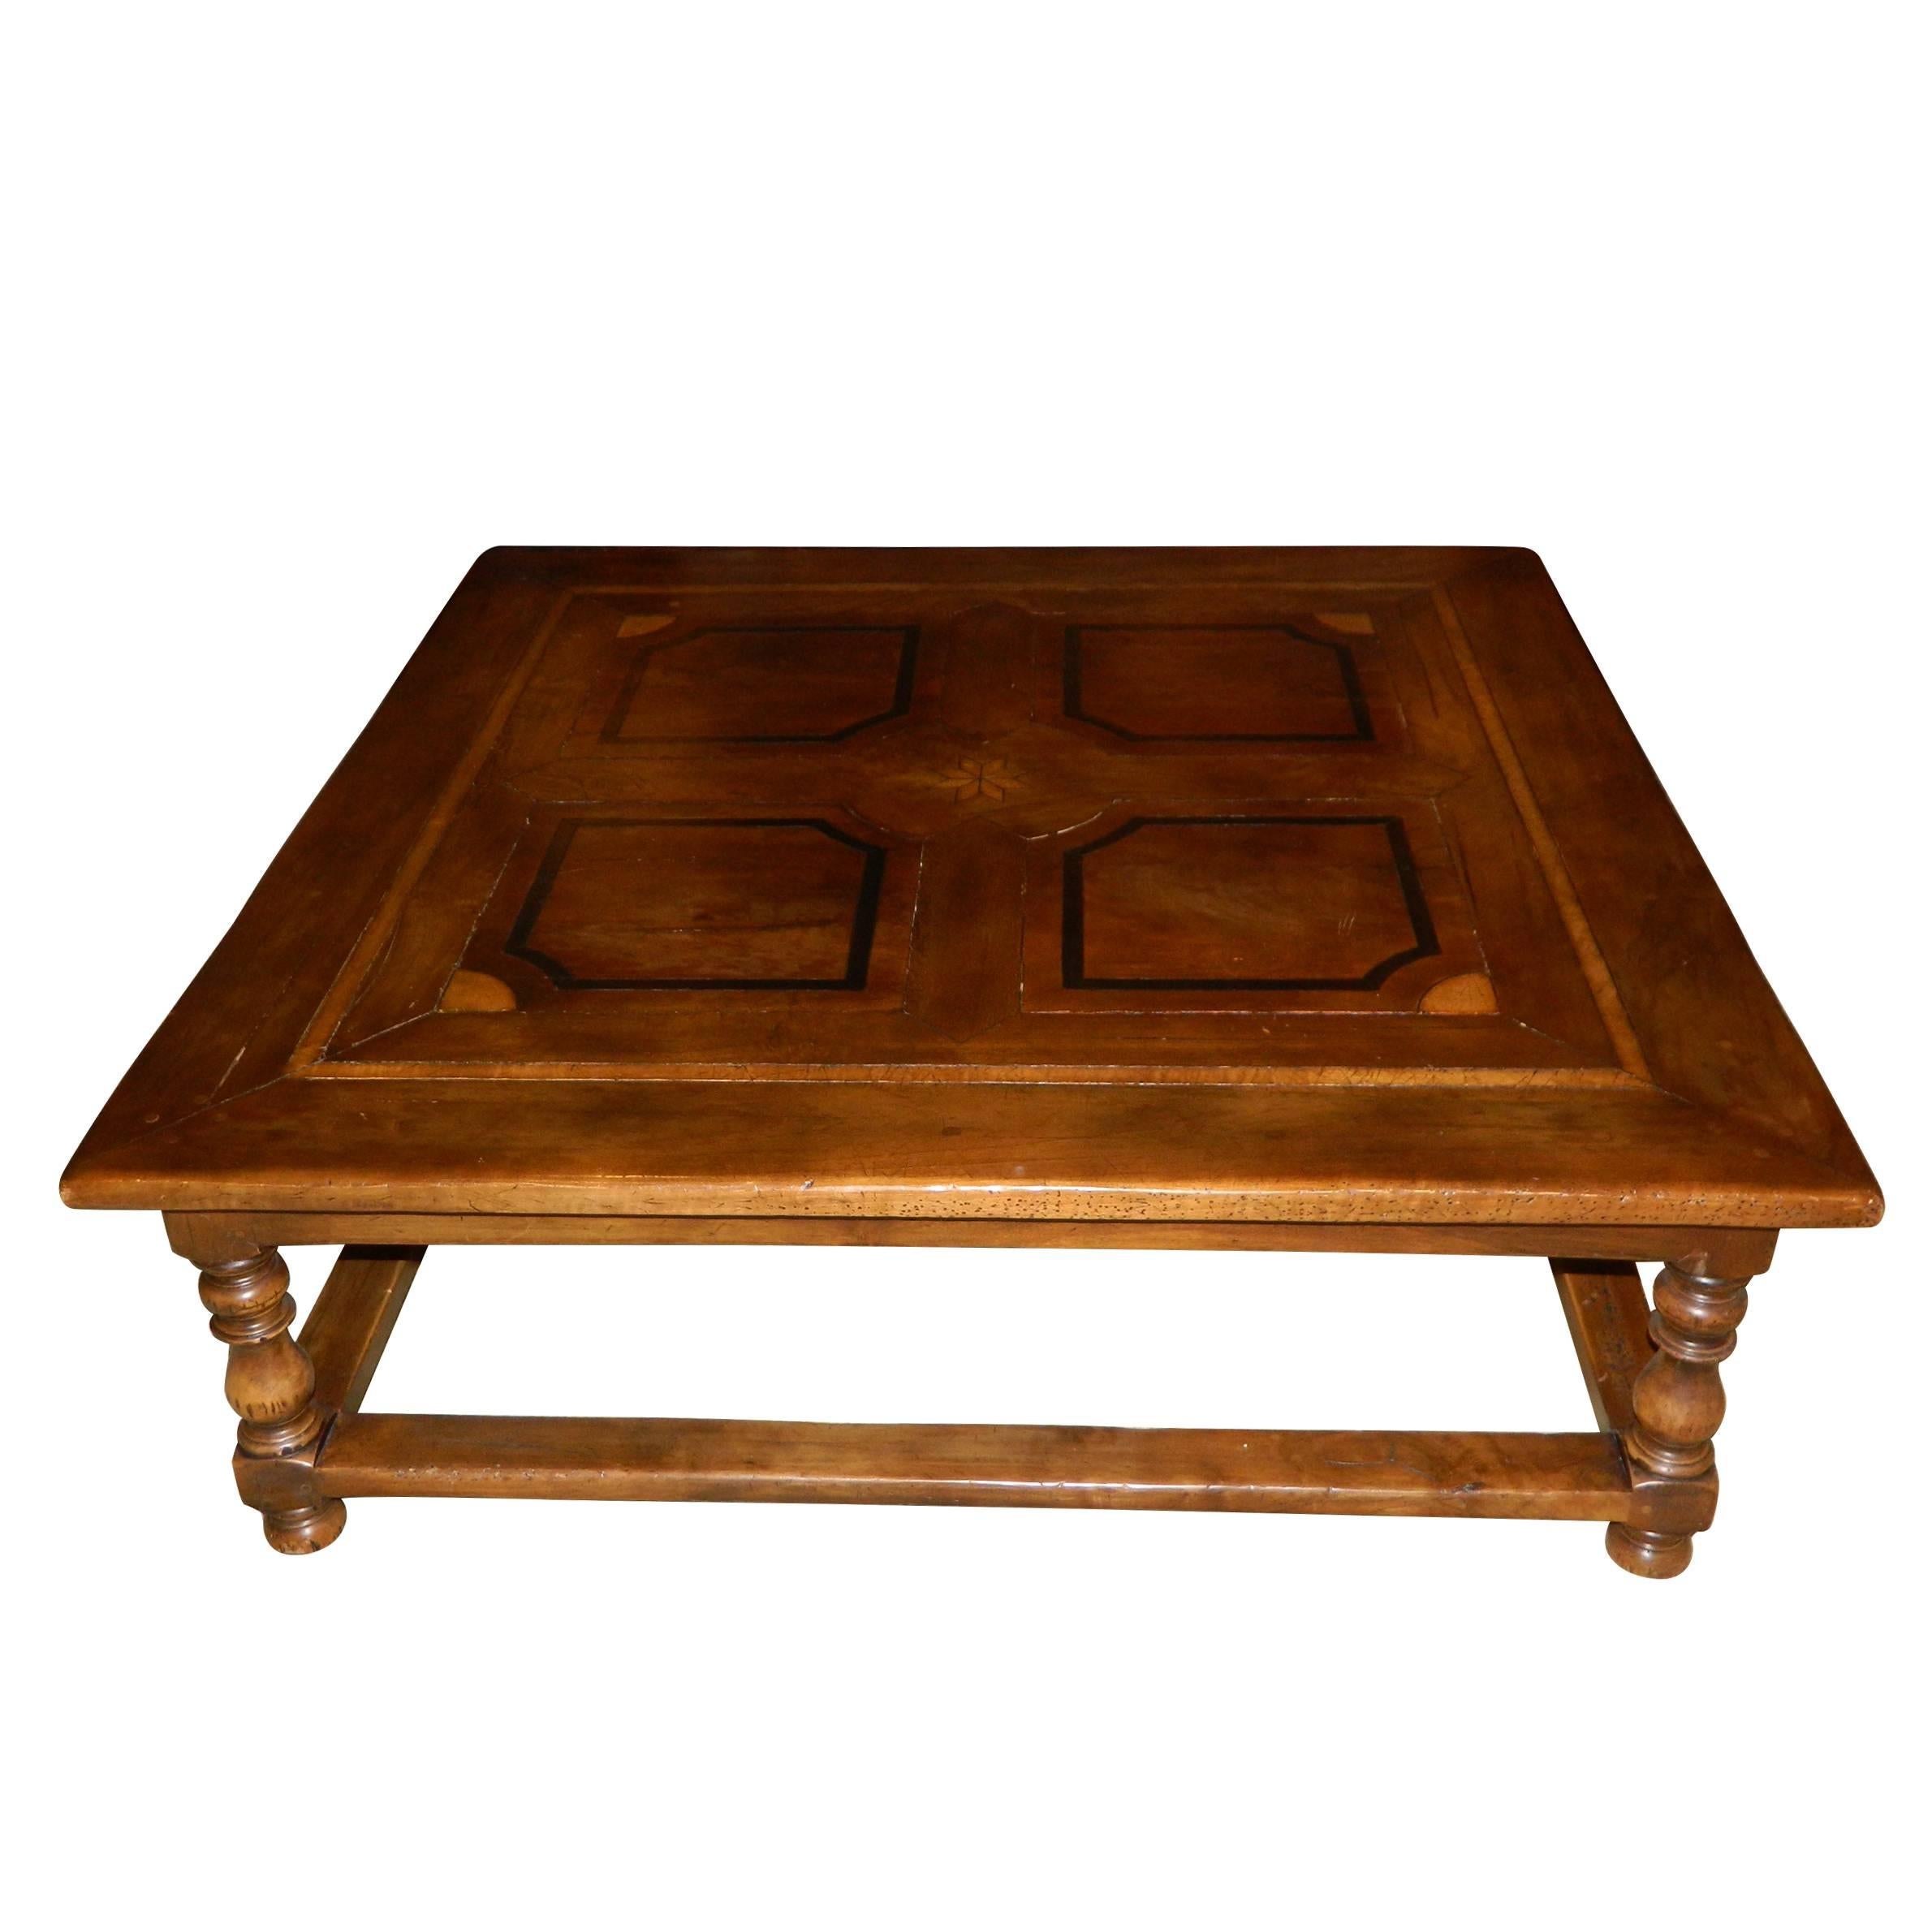 Large Square Coffee Table with Inlay Design, 20th Century